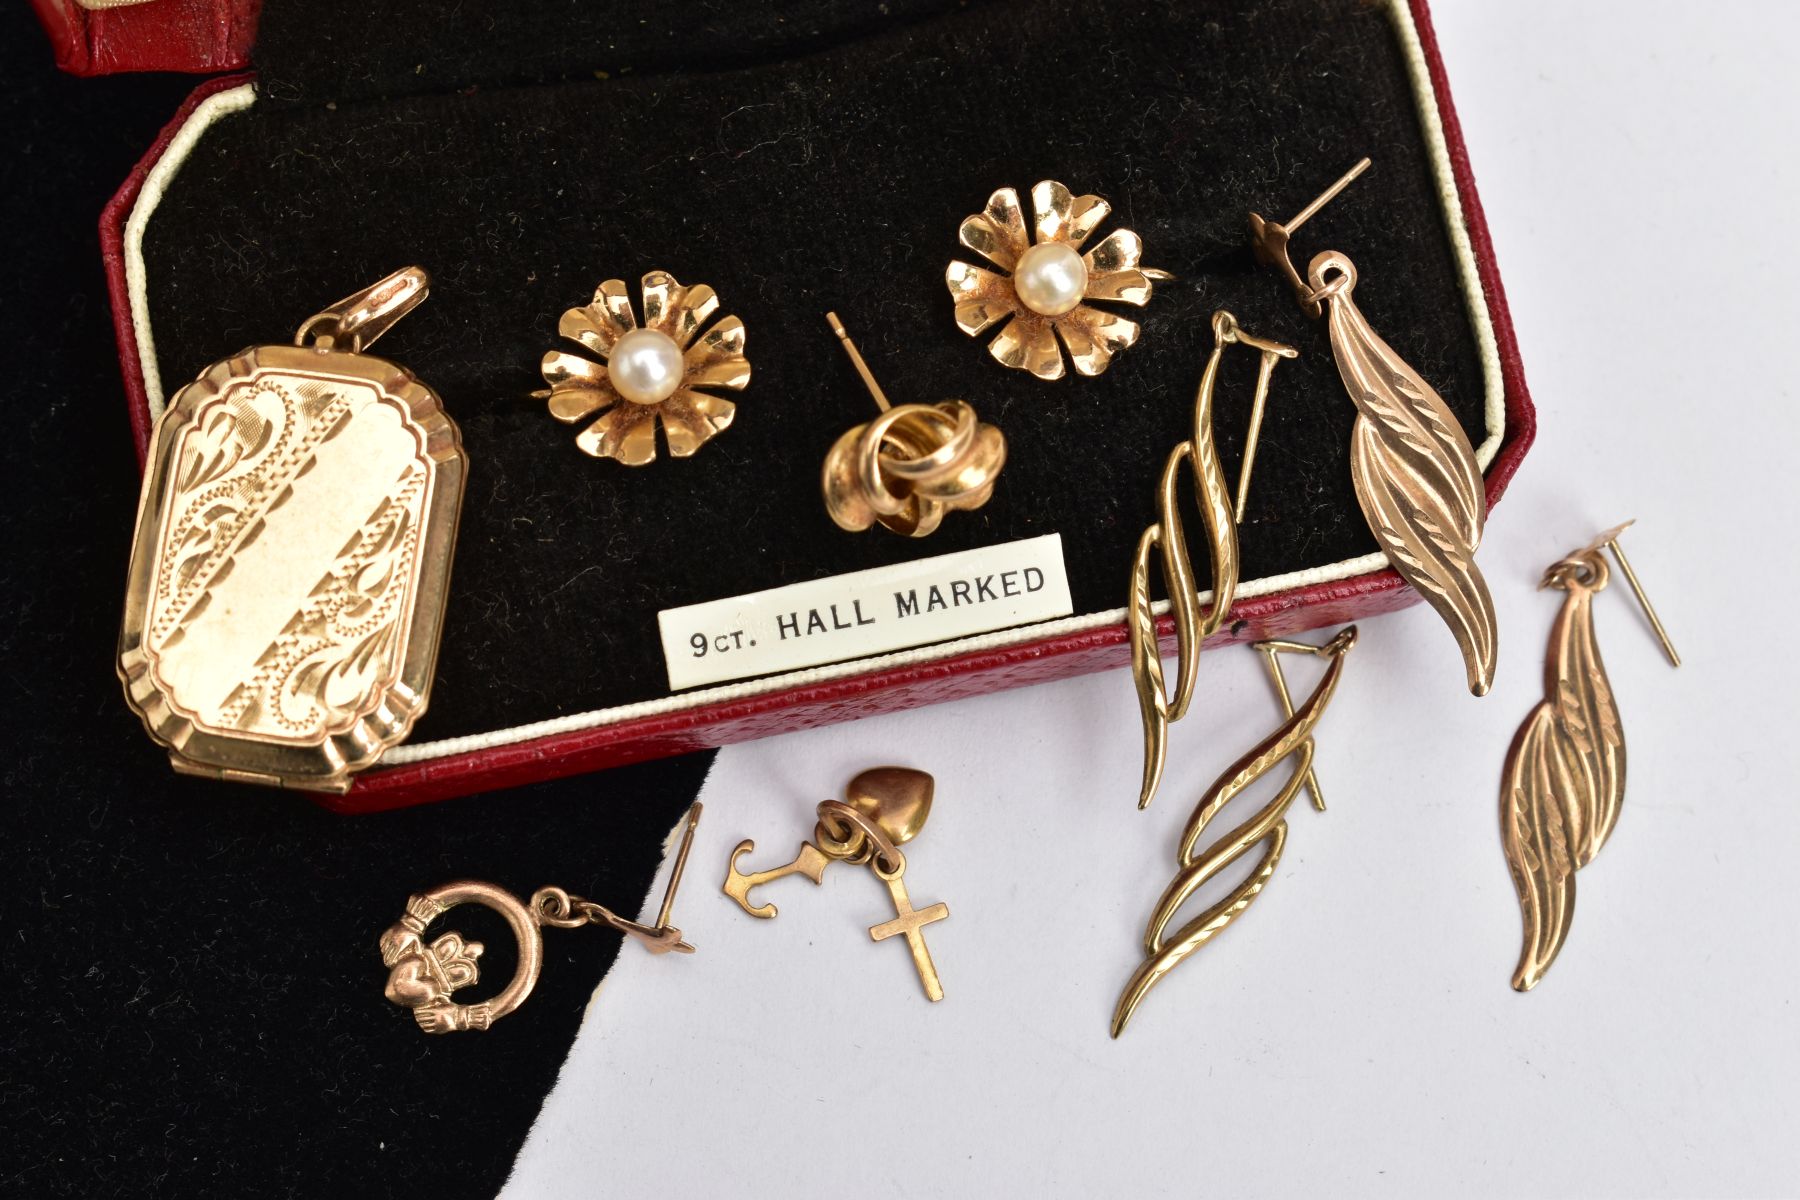 A PAIR OF 9CT GOLD EARRINGS AND A SELECTION OF YELLOW METAL JEWELLERY, a pair of floral earrings set